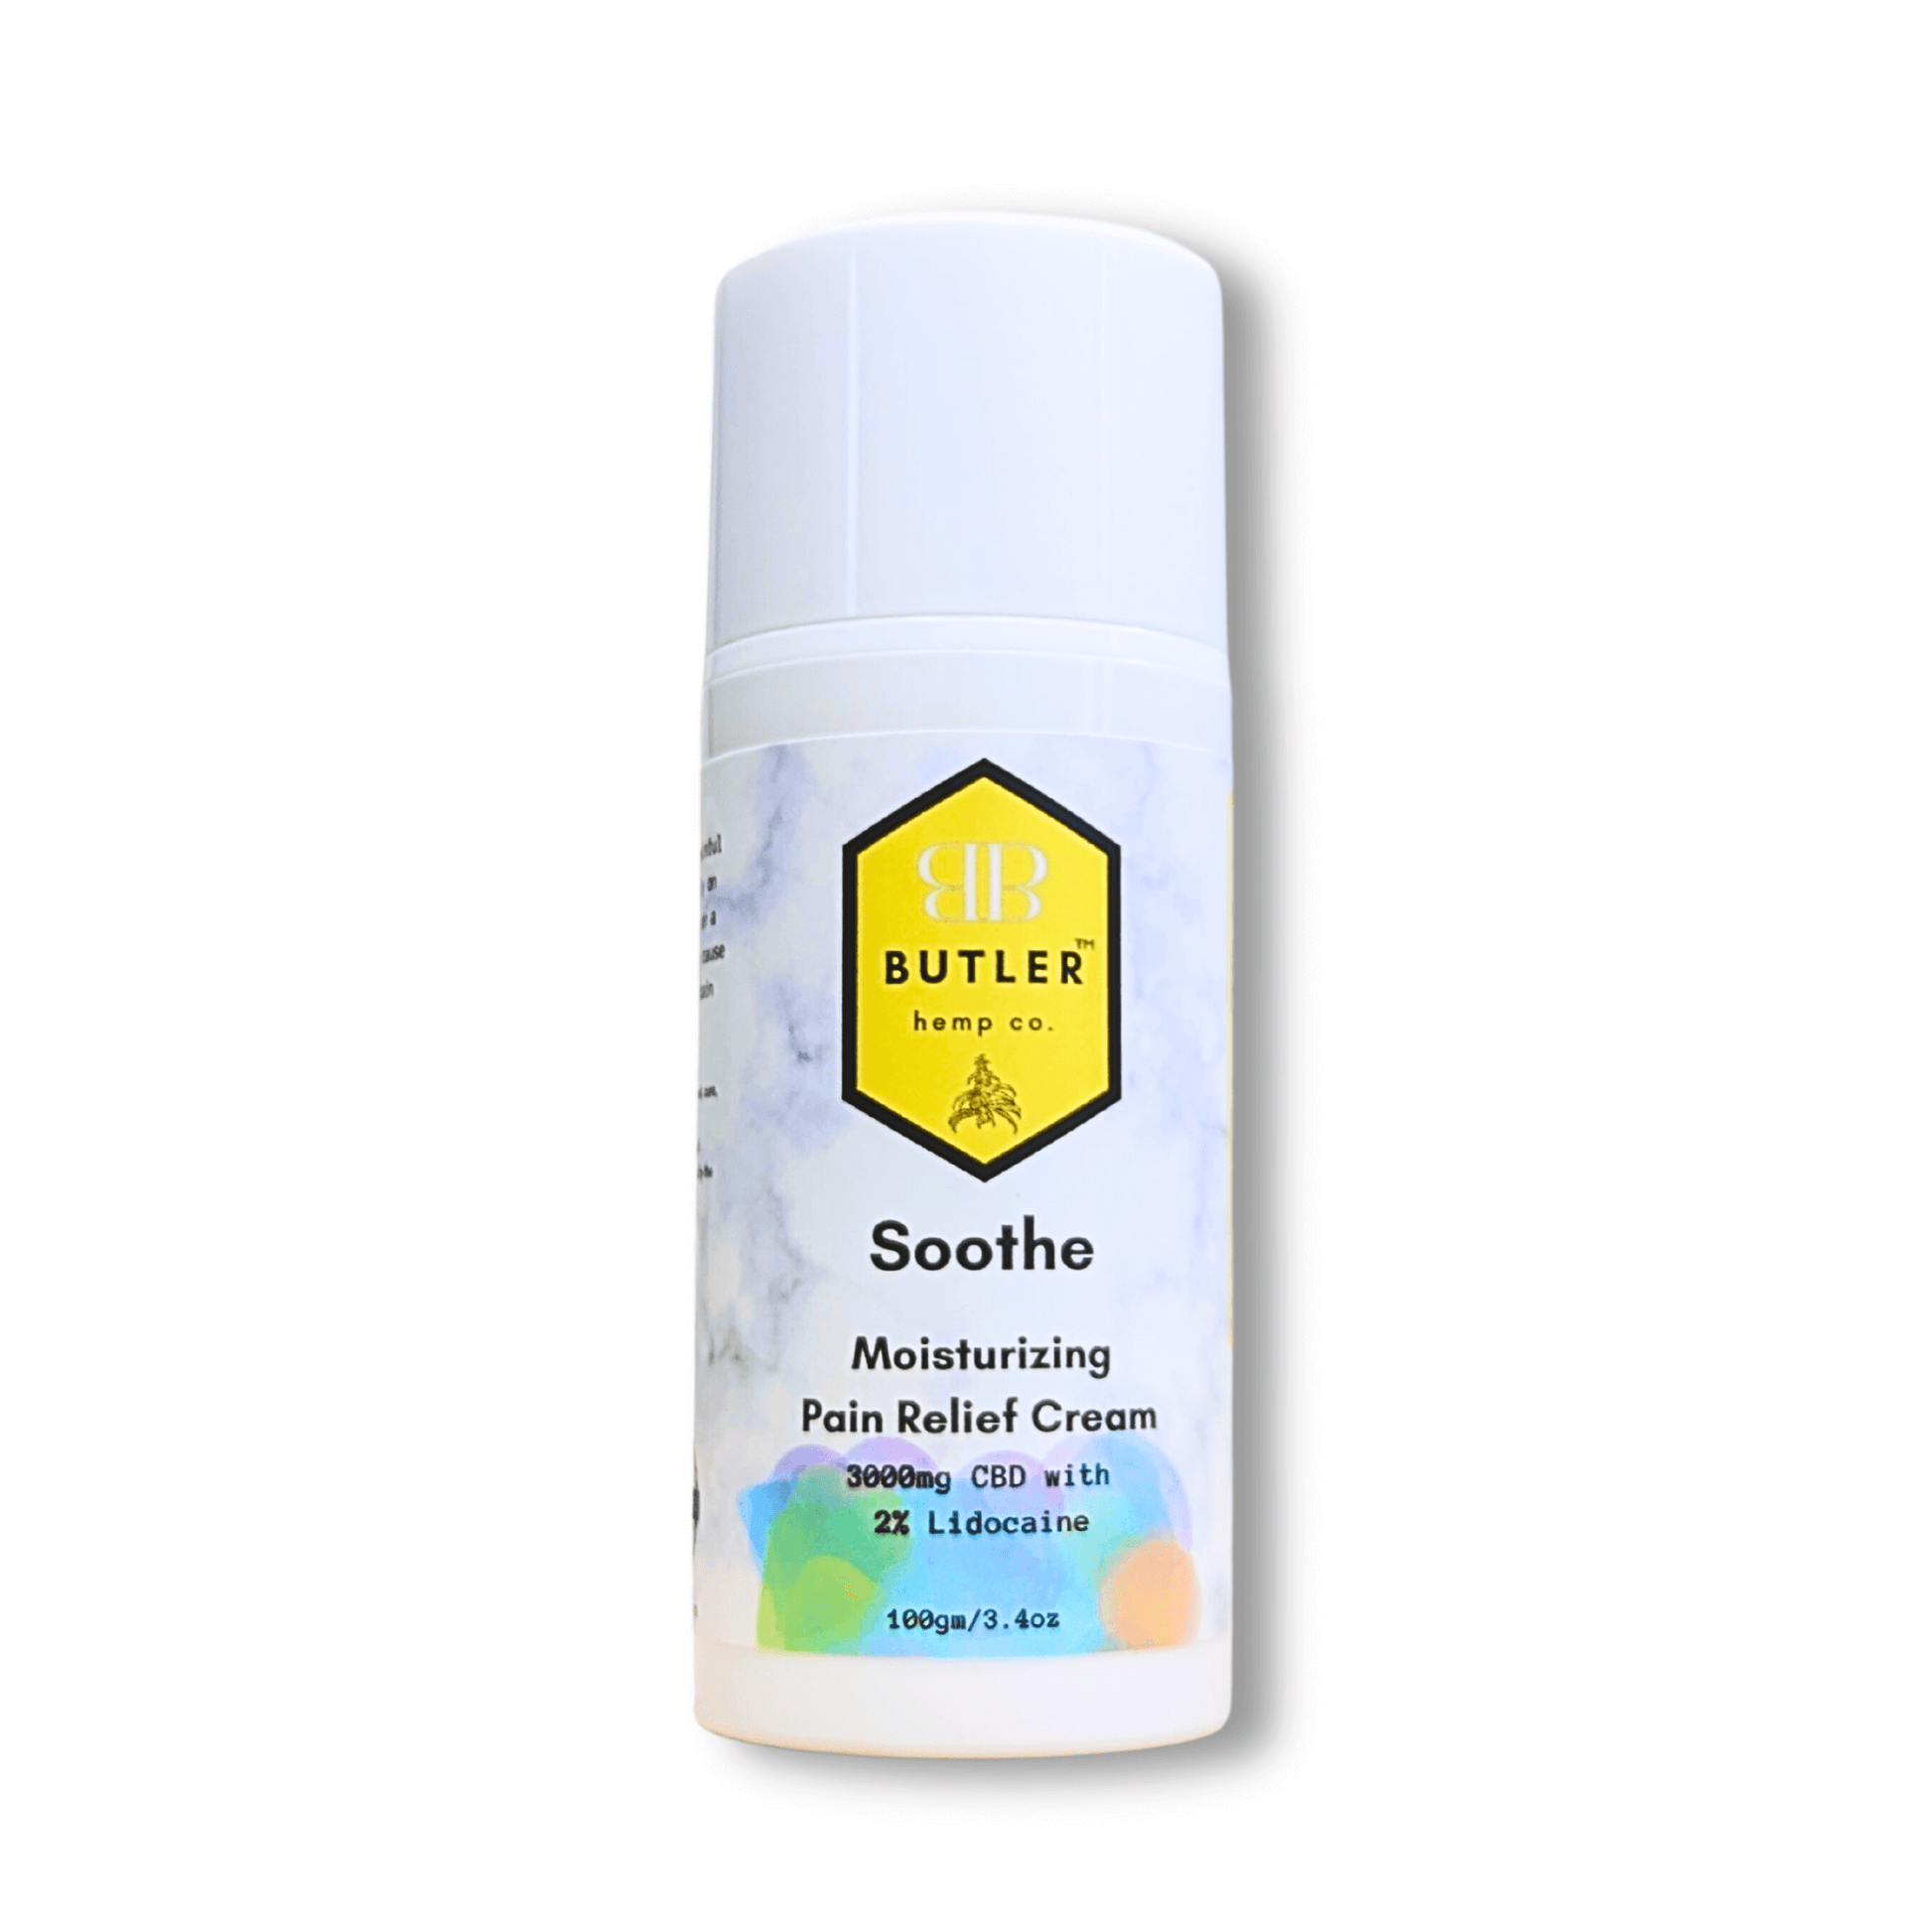 Butler Soothe Moisturizing Relief Cream. A lightly scented citrus-vanilla scented lotion packed with shea butter and aloe and loaded with 3000mg of hemp extract and 2% lidocaine that creates an intensely moisturizing and soothing daily pain relief aid. Perfect for treating dull and aching joint pain and helping soothe inflamed or raw skin.Edit